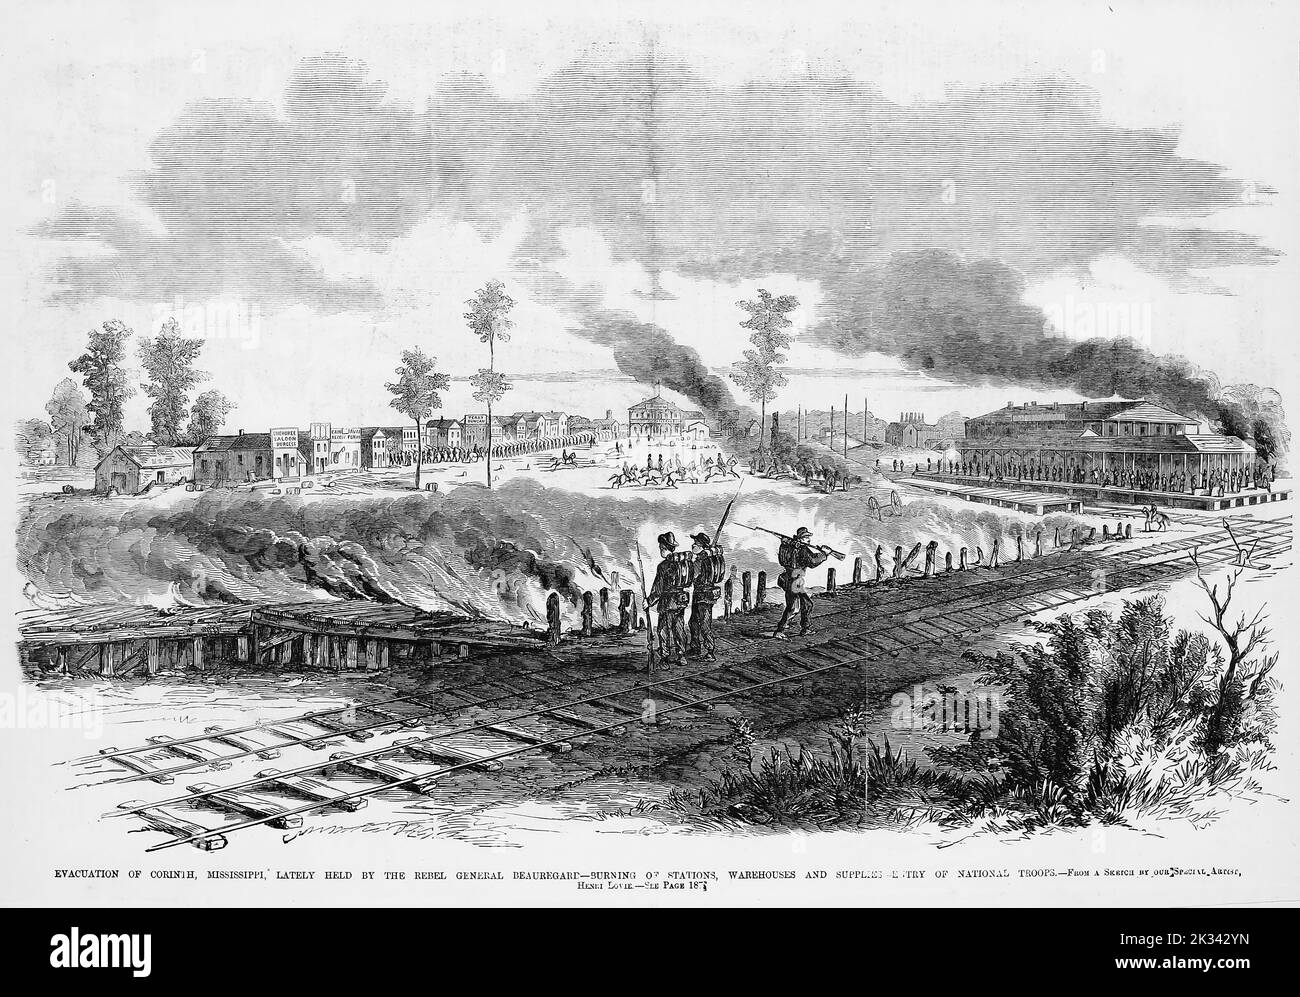 Evacuation of Corinth, Mississippi, lately held by the Rebel General P. G. T. Beauregard - Burning of stations, warehouses and supplies - Entry of National troops. May 1862. Siege of Corinth. 19th century American Civil War illustration from Frank Leslie's Illustrated Newspaper Stock Photo